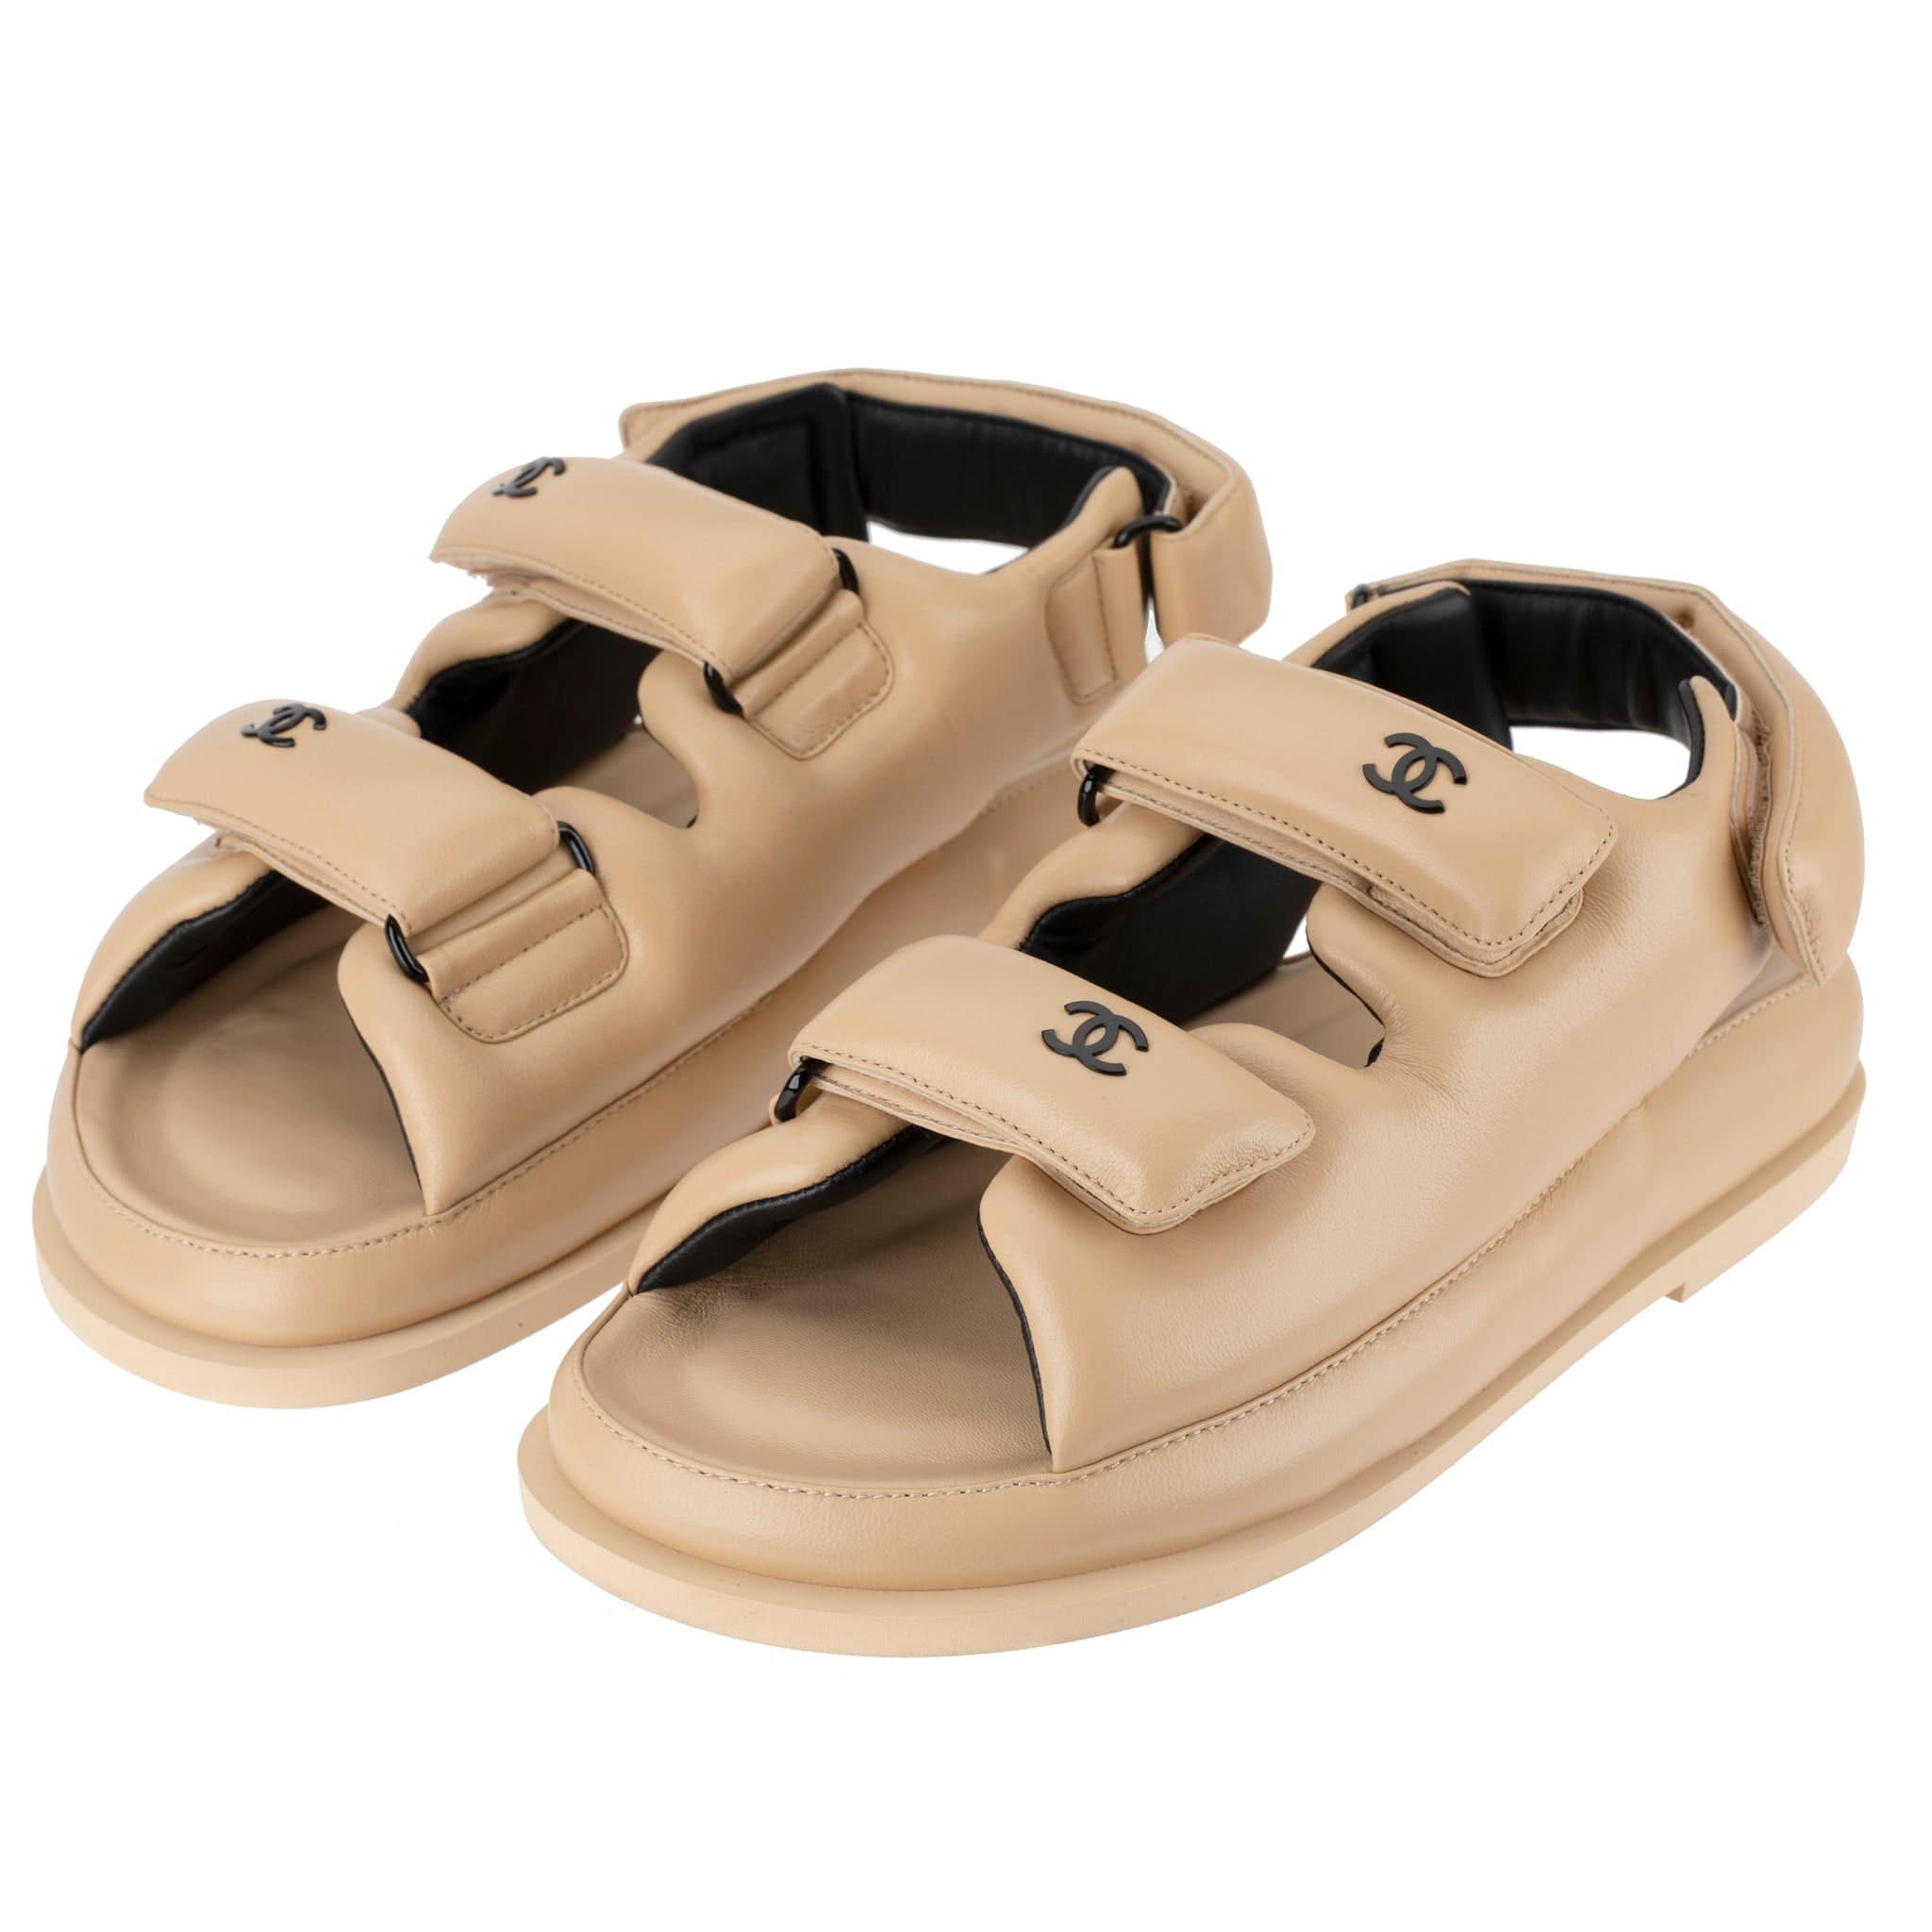 CROSS LETHER DAD SANDALS 【80%OFF!】 - 靴